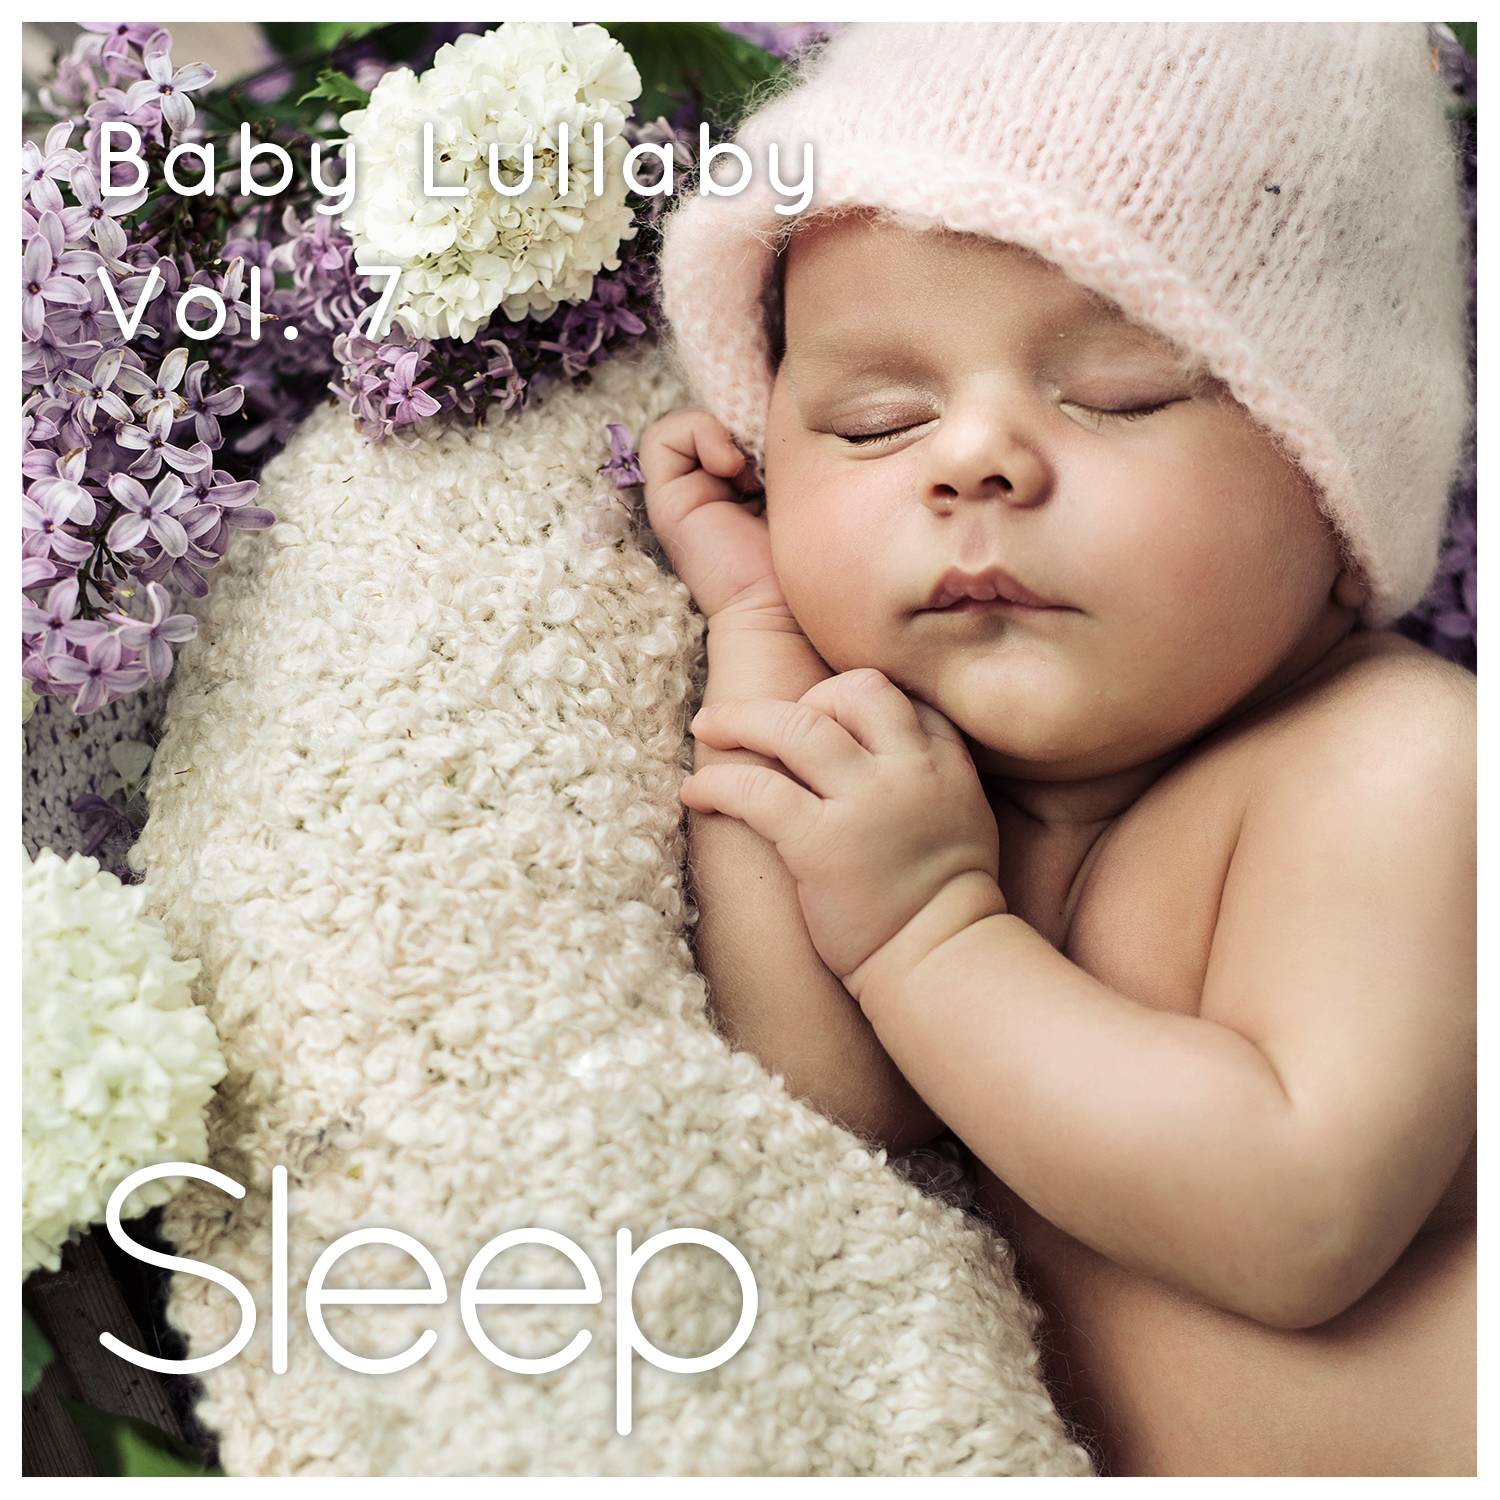 Baby Sleep Ambient Lullaby, Pt. 35